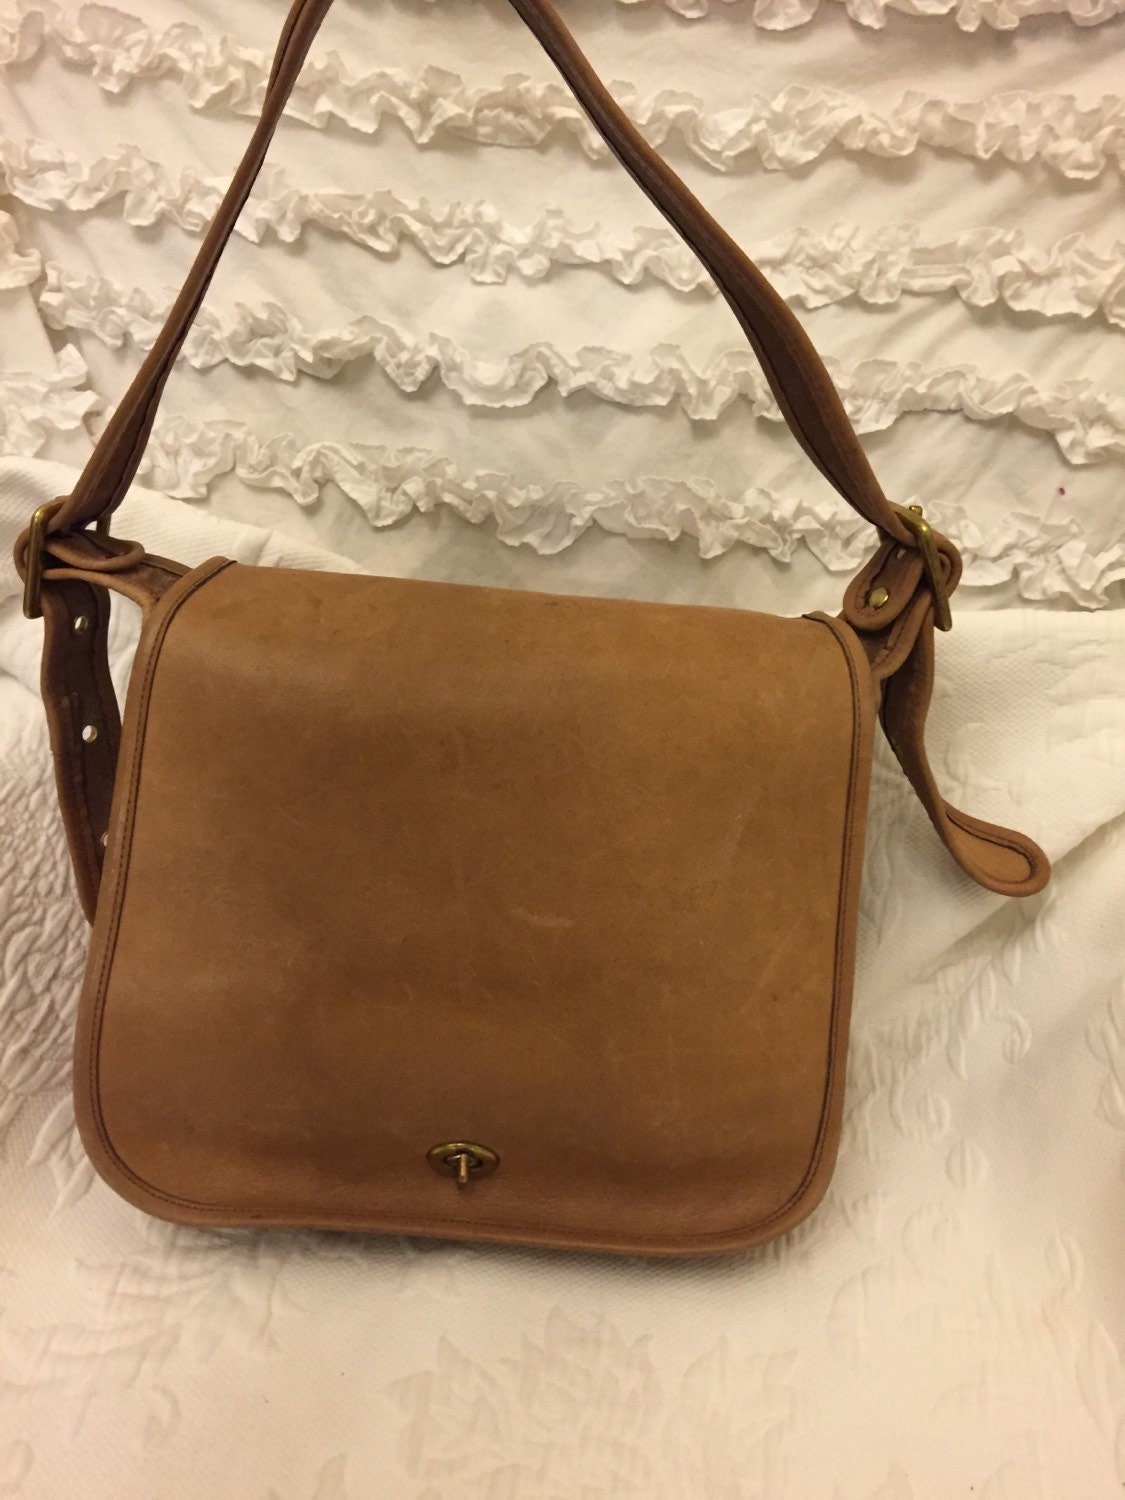 Vintage coach Stewardess made in NY brown leather bag